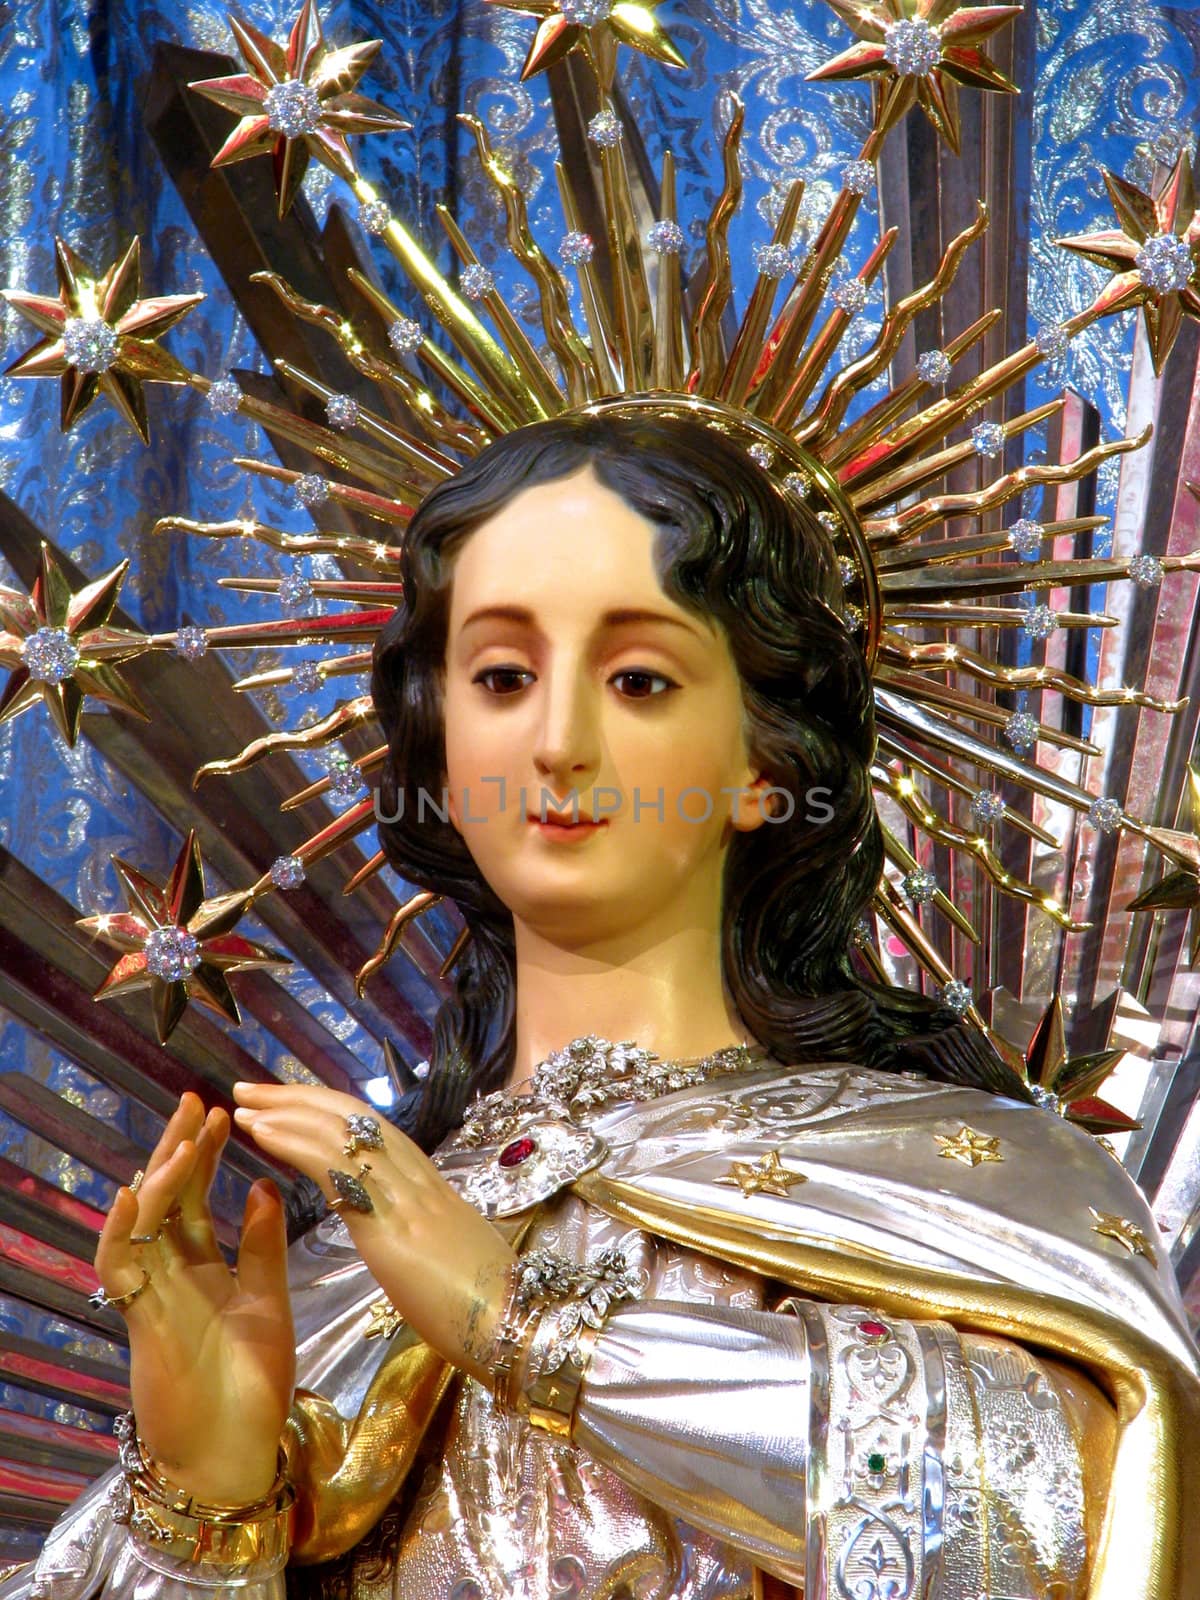 The most precious and beautiful statue of A detail of the statue of the Immaculate Conception in the church of Cospicua, Malta.